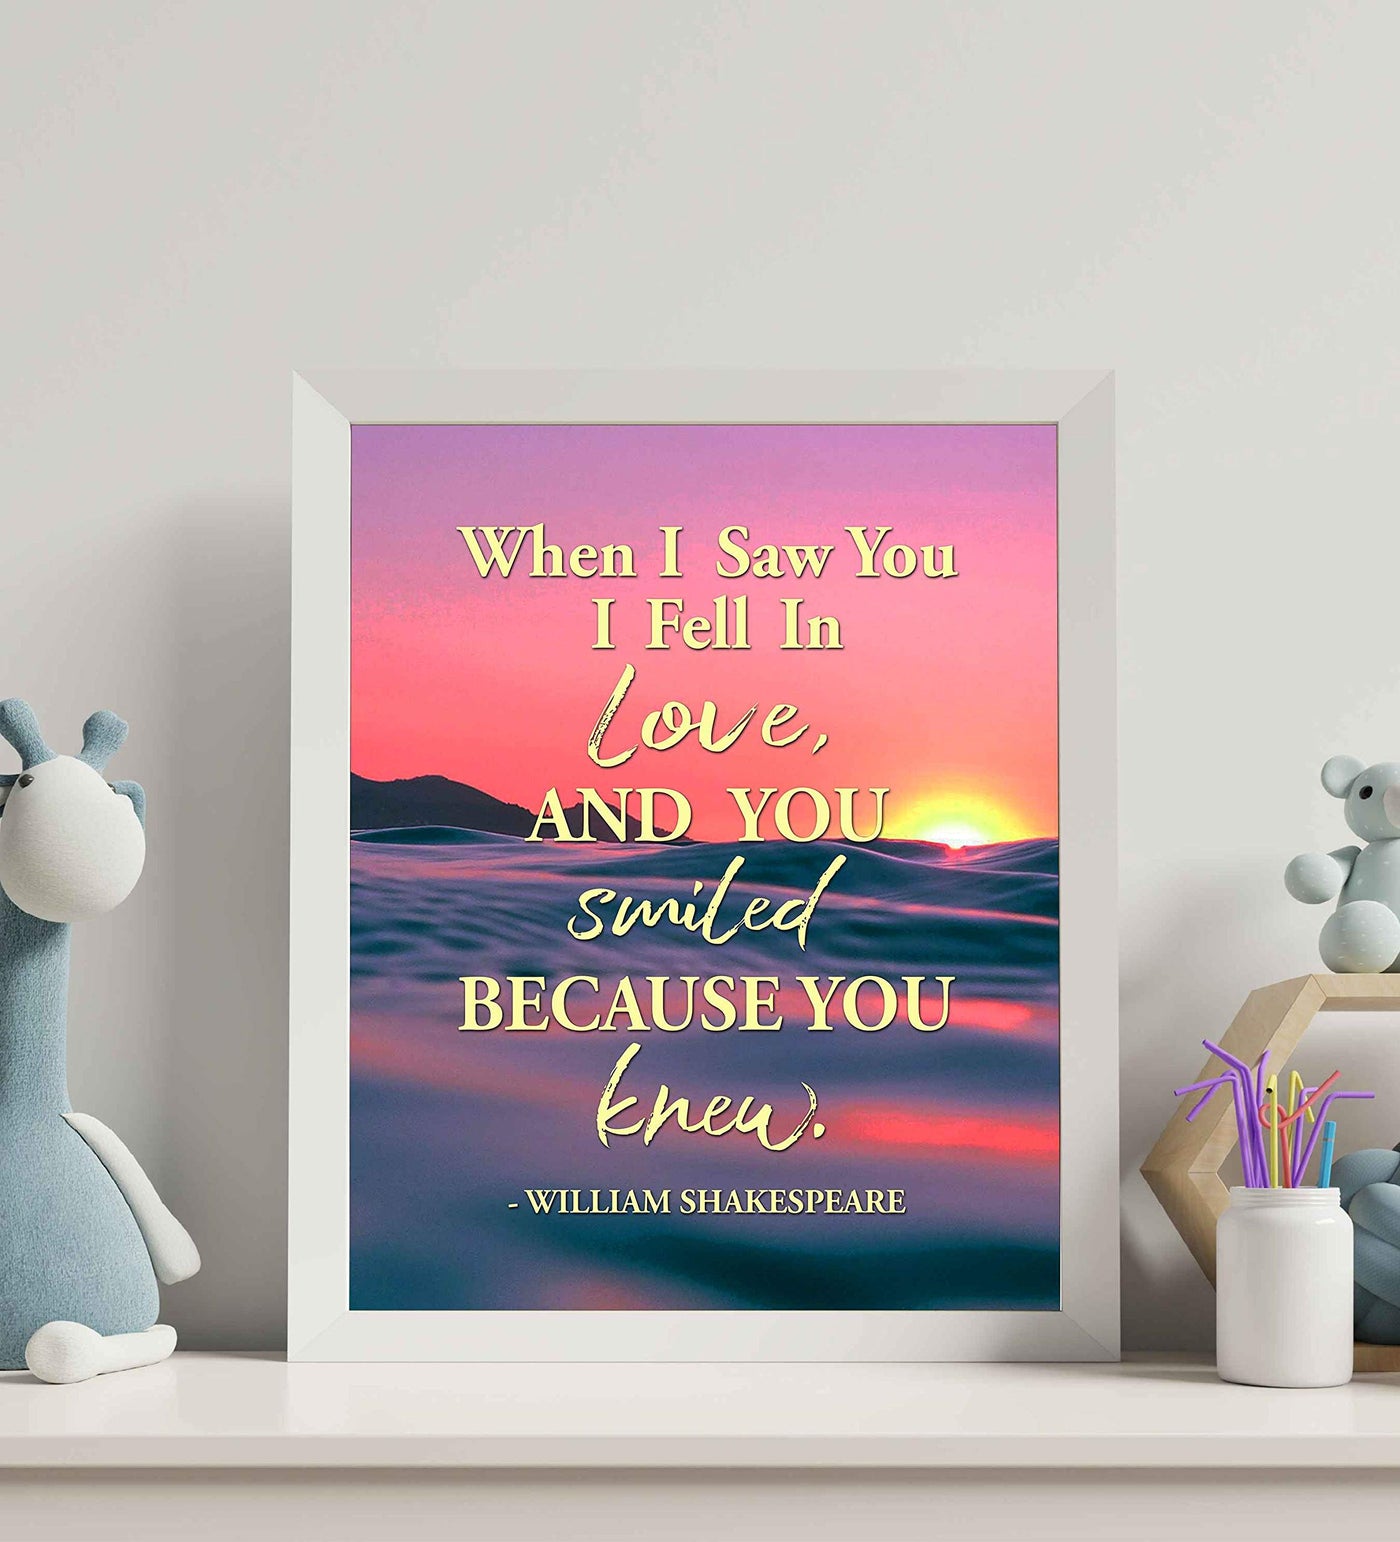 Shakespeare Quotes-"When I Saw You I Fell In Love"-Literary Wall Art Sign. 8 x 10" Romantic Ocean Sunset Poster Print-Ready to Frame. Inspirational Home-Bedroom-Office Decor. Great Wedding Gift!